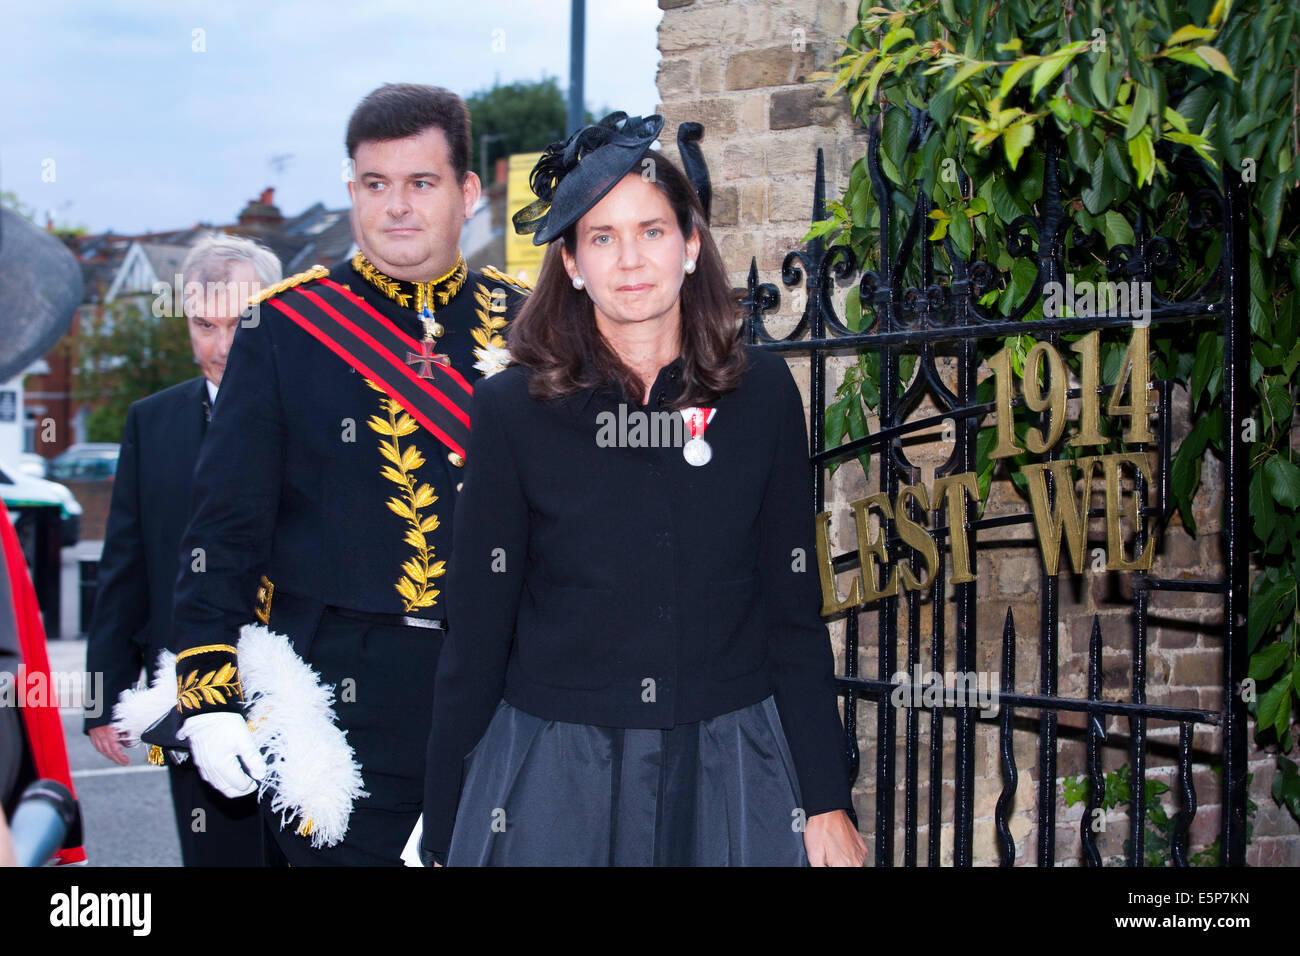 Twickenham, London UK, Monday August 4, 2014. Centre, wearing black, Her Serene Highness Princess Marie-Therese von Hohenberg (great-granddaughter of Archduke Franz Ferdinand of Austria–Hungary, whose assassination in June 1914 lead directly to World War 1, The Great War of 1914/1918) as she enters Radnor Gardens in Twickenham to take part in a service to mark the 100th anniversary of Great Britain's entry into the war, on Monday August 4, 2014. Left, wearing uniform, is her husband, Mr. Anthony Bailey OBE GCSS. Credit:  David Gee/Alamy Live News Stock Photo